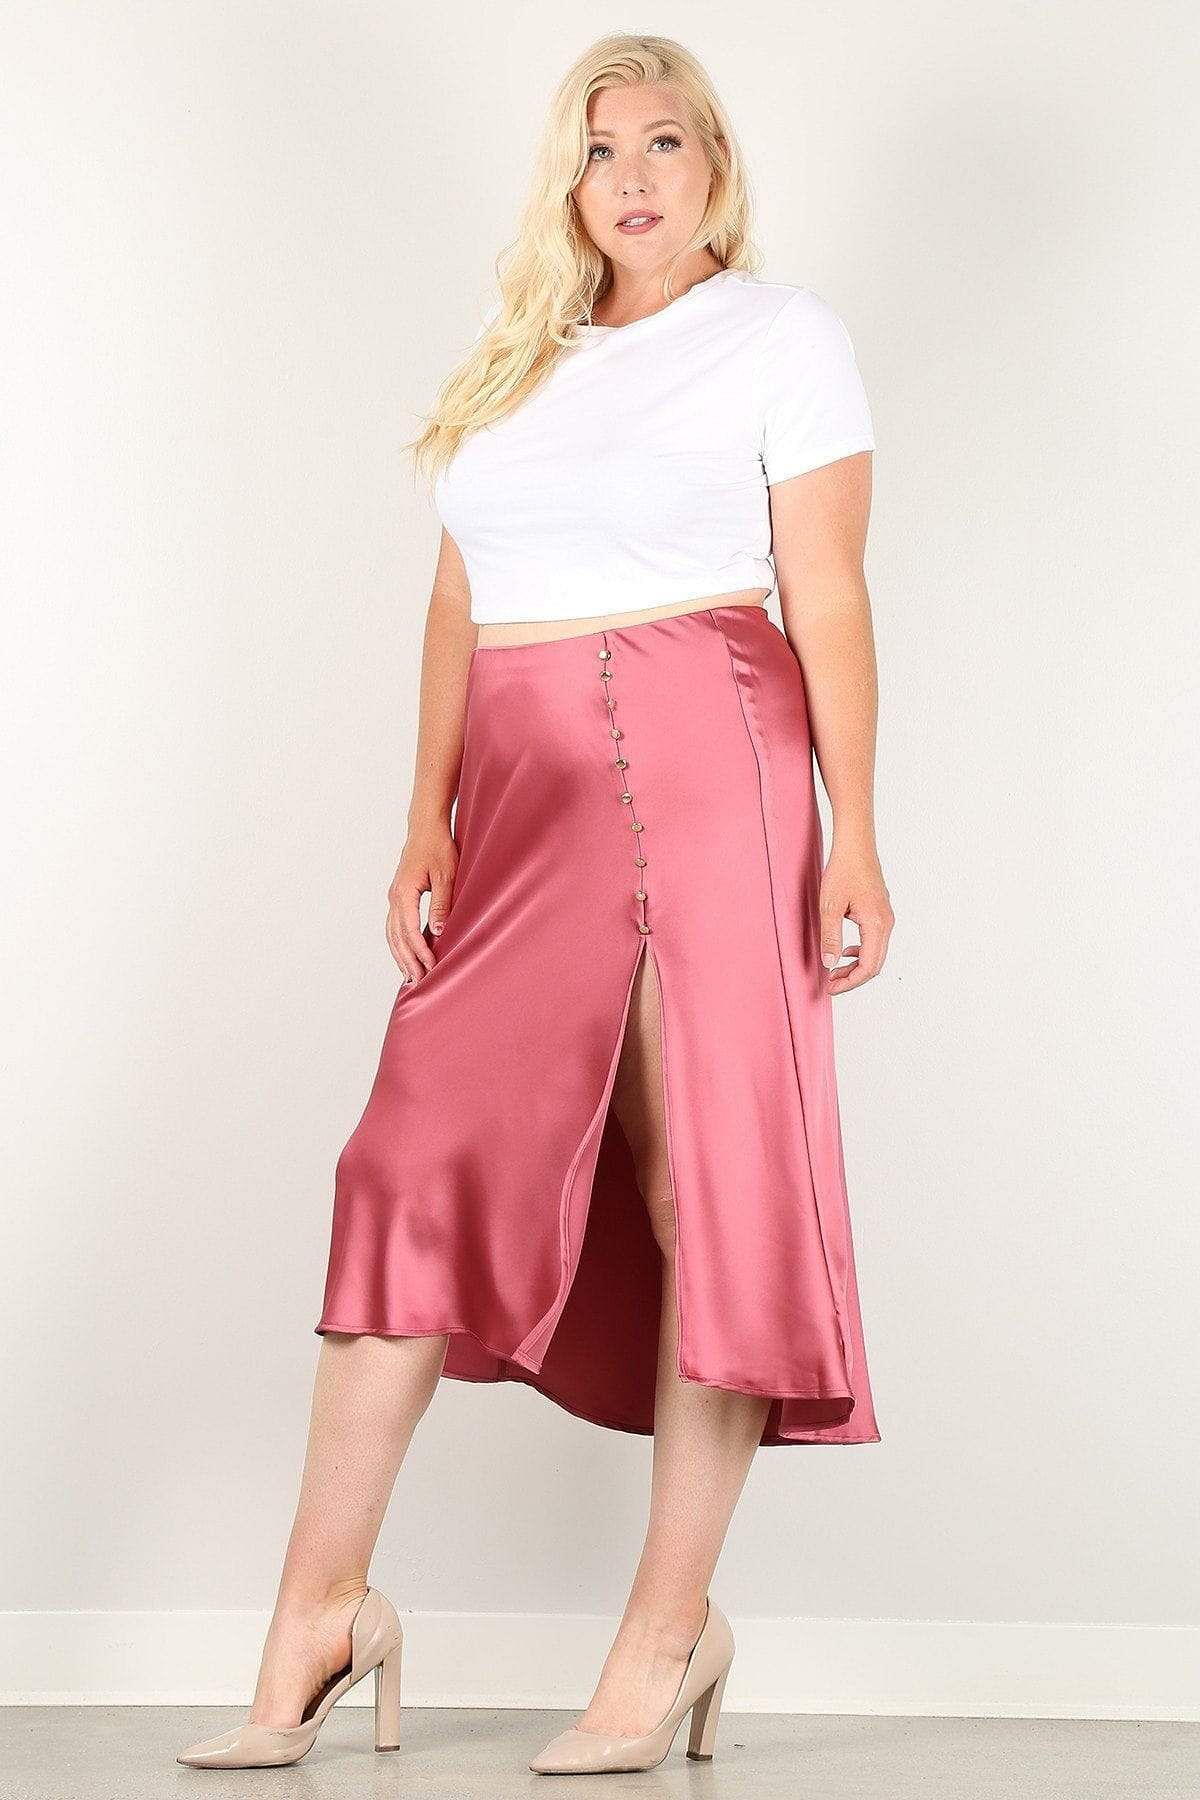 Rose Plus Size Midi Skirt With Side Slit - Shopping Therapy 3XL skirt